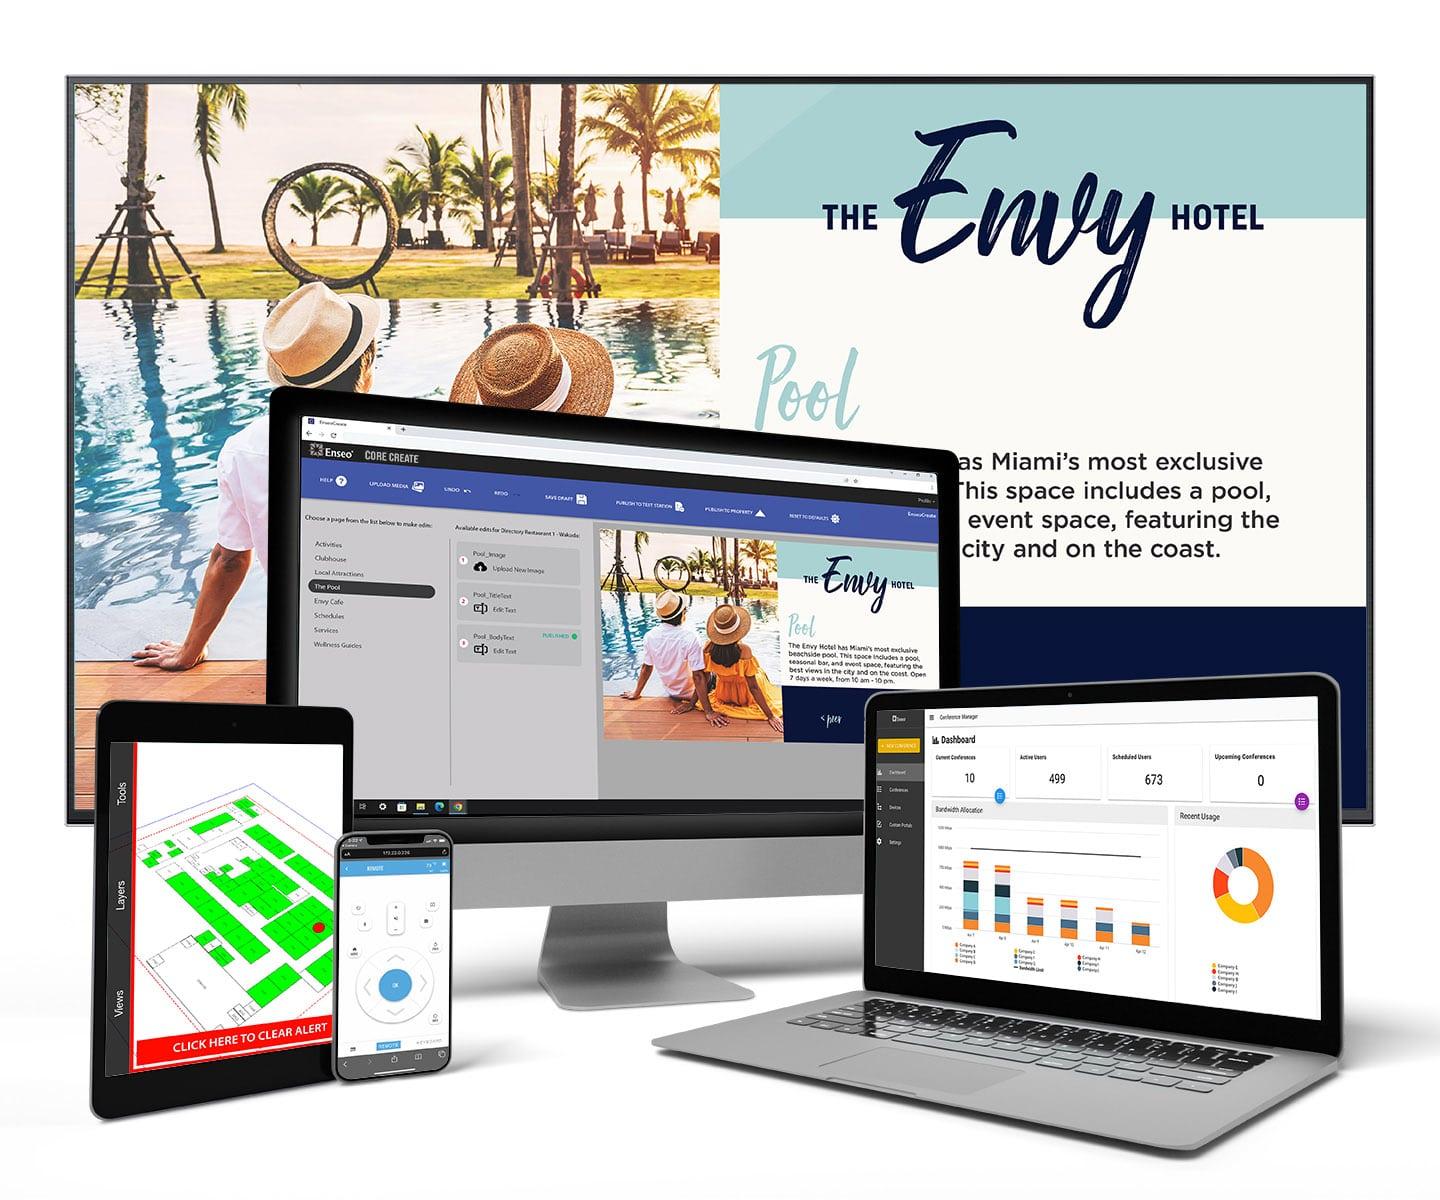 A collage showcasing various digital devices displaying content related to "The Envy Hotel", including a webpage, analytics dashboard, and a floor plan alert system.